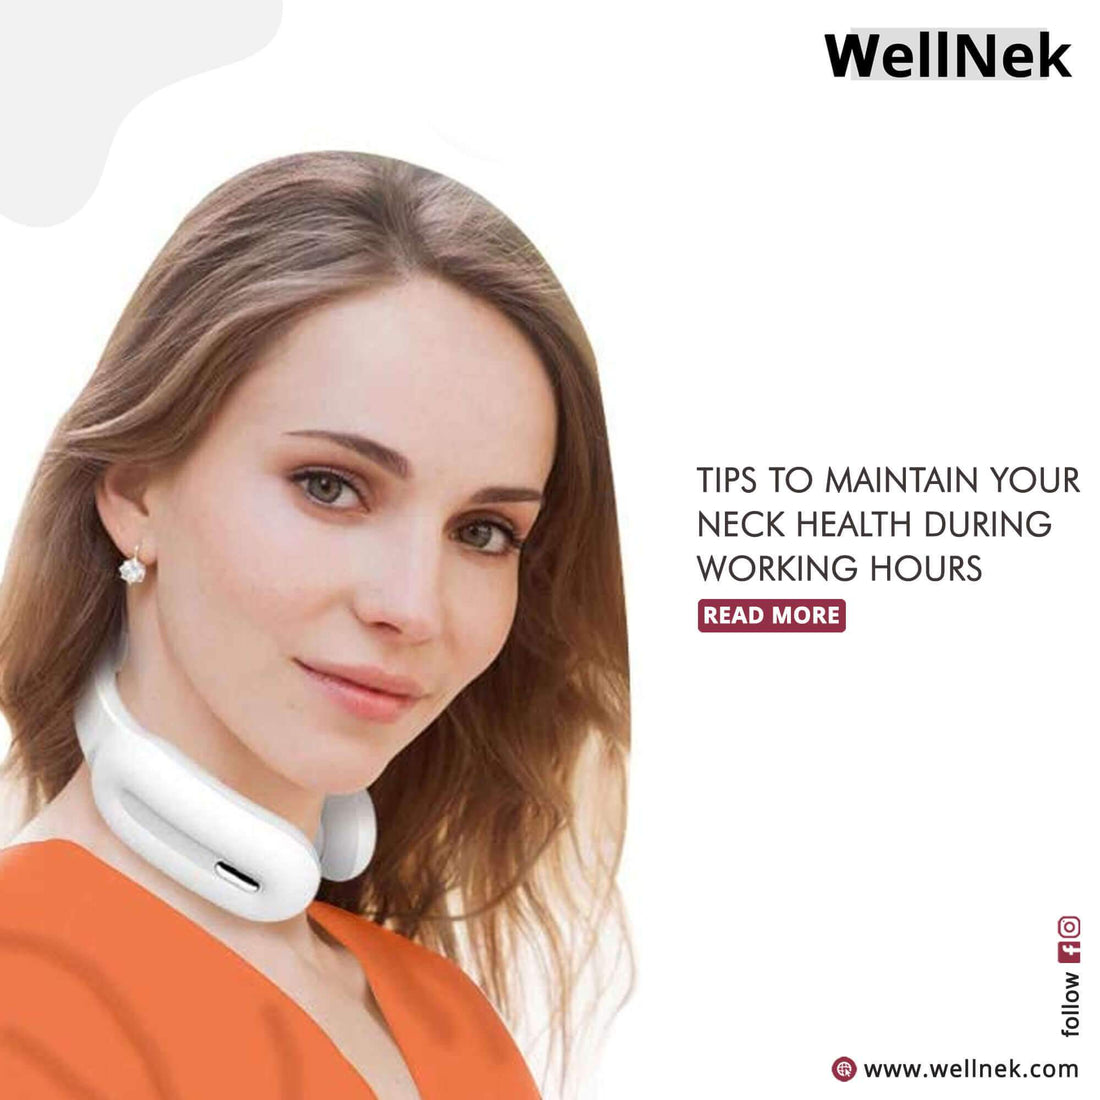 Tips To Maintain Your Neck Health During Working Hours | Wellnek